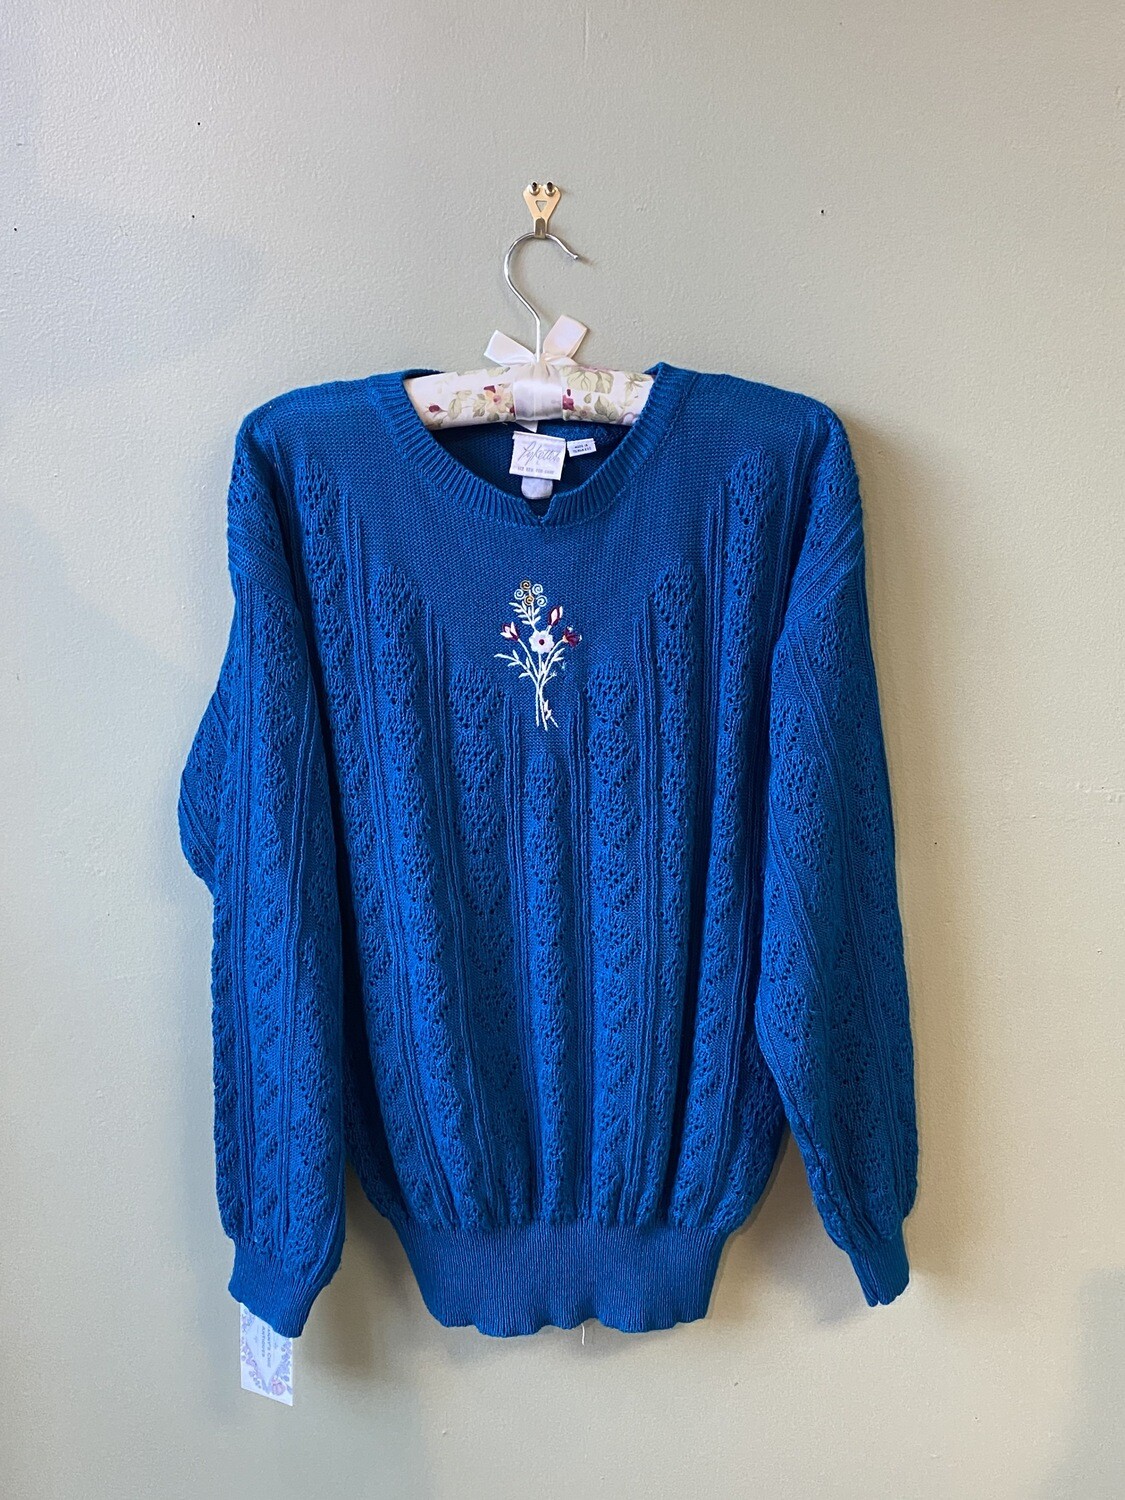 Vintage Pykettes Blue Sweater with Bouquette and Pierced Sleeve Knit, Estimated Size M 